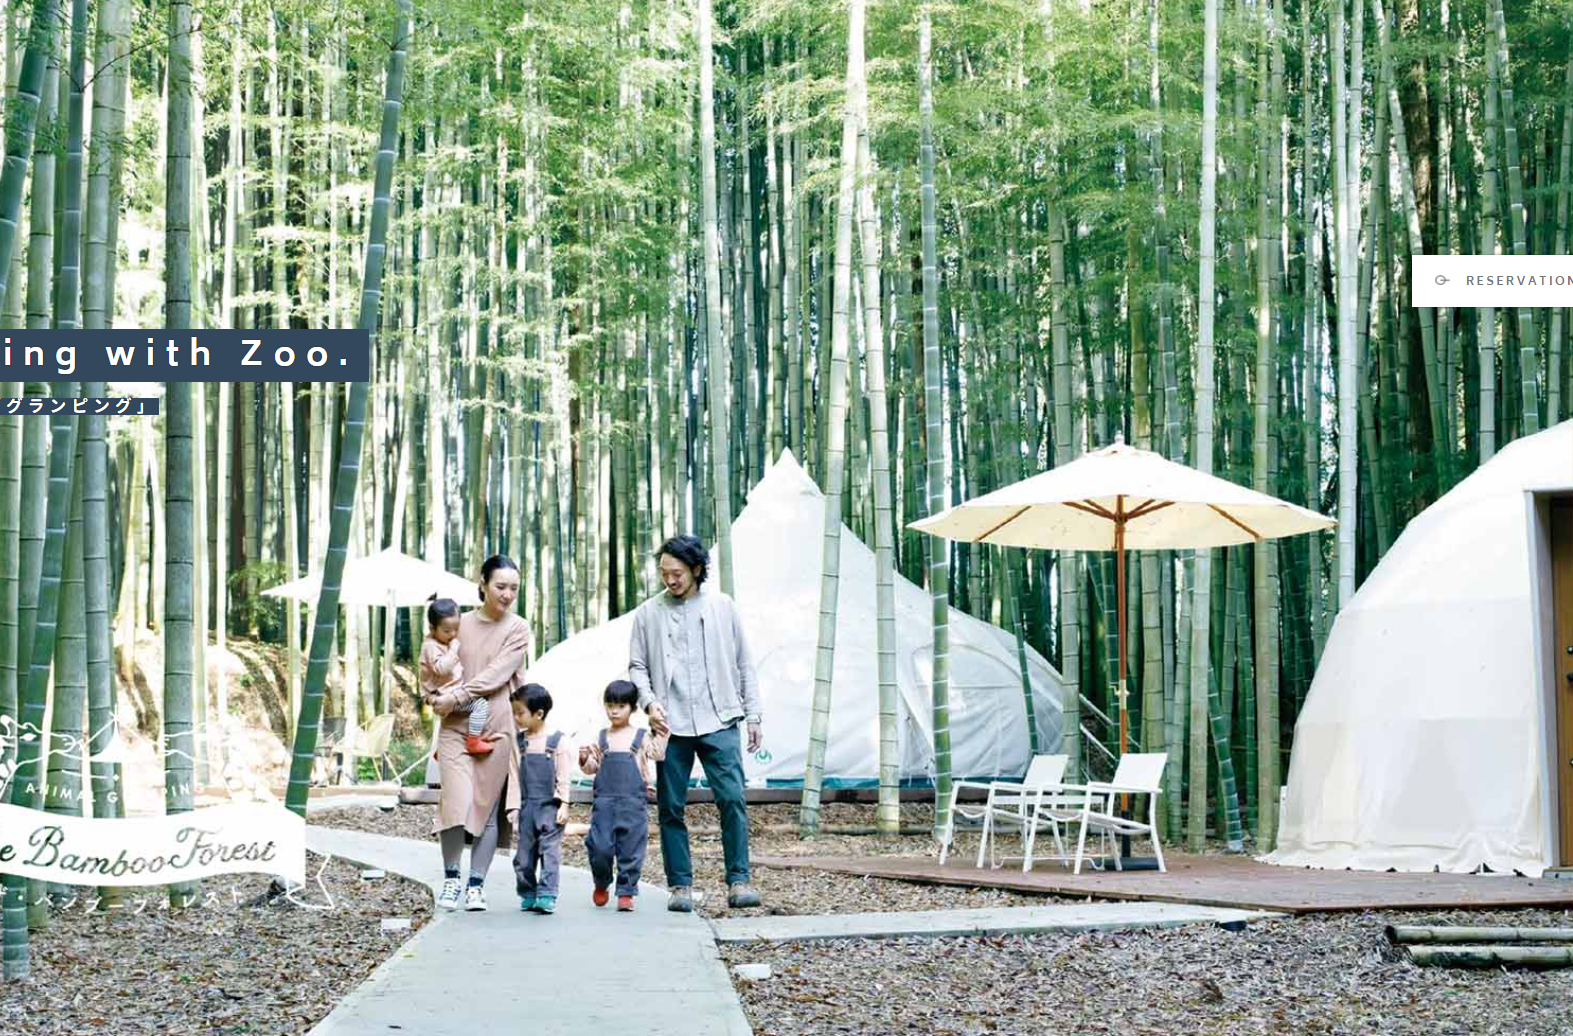 THE BAMBOO FORESTのテントと竹林